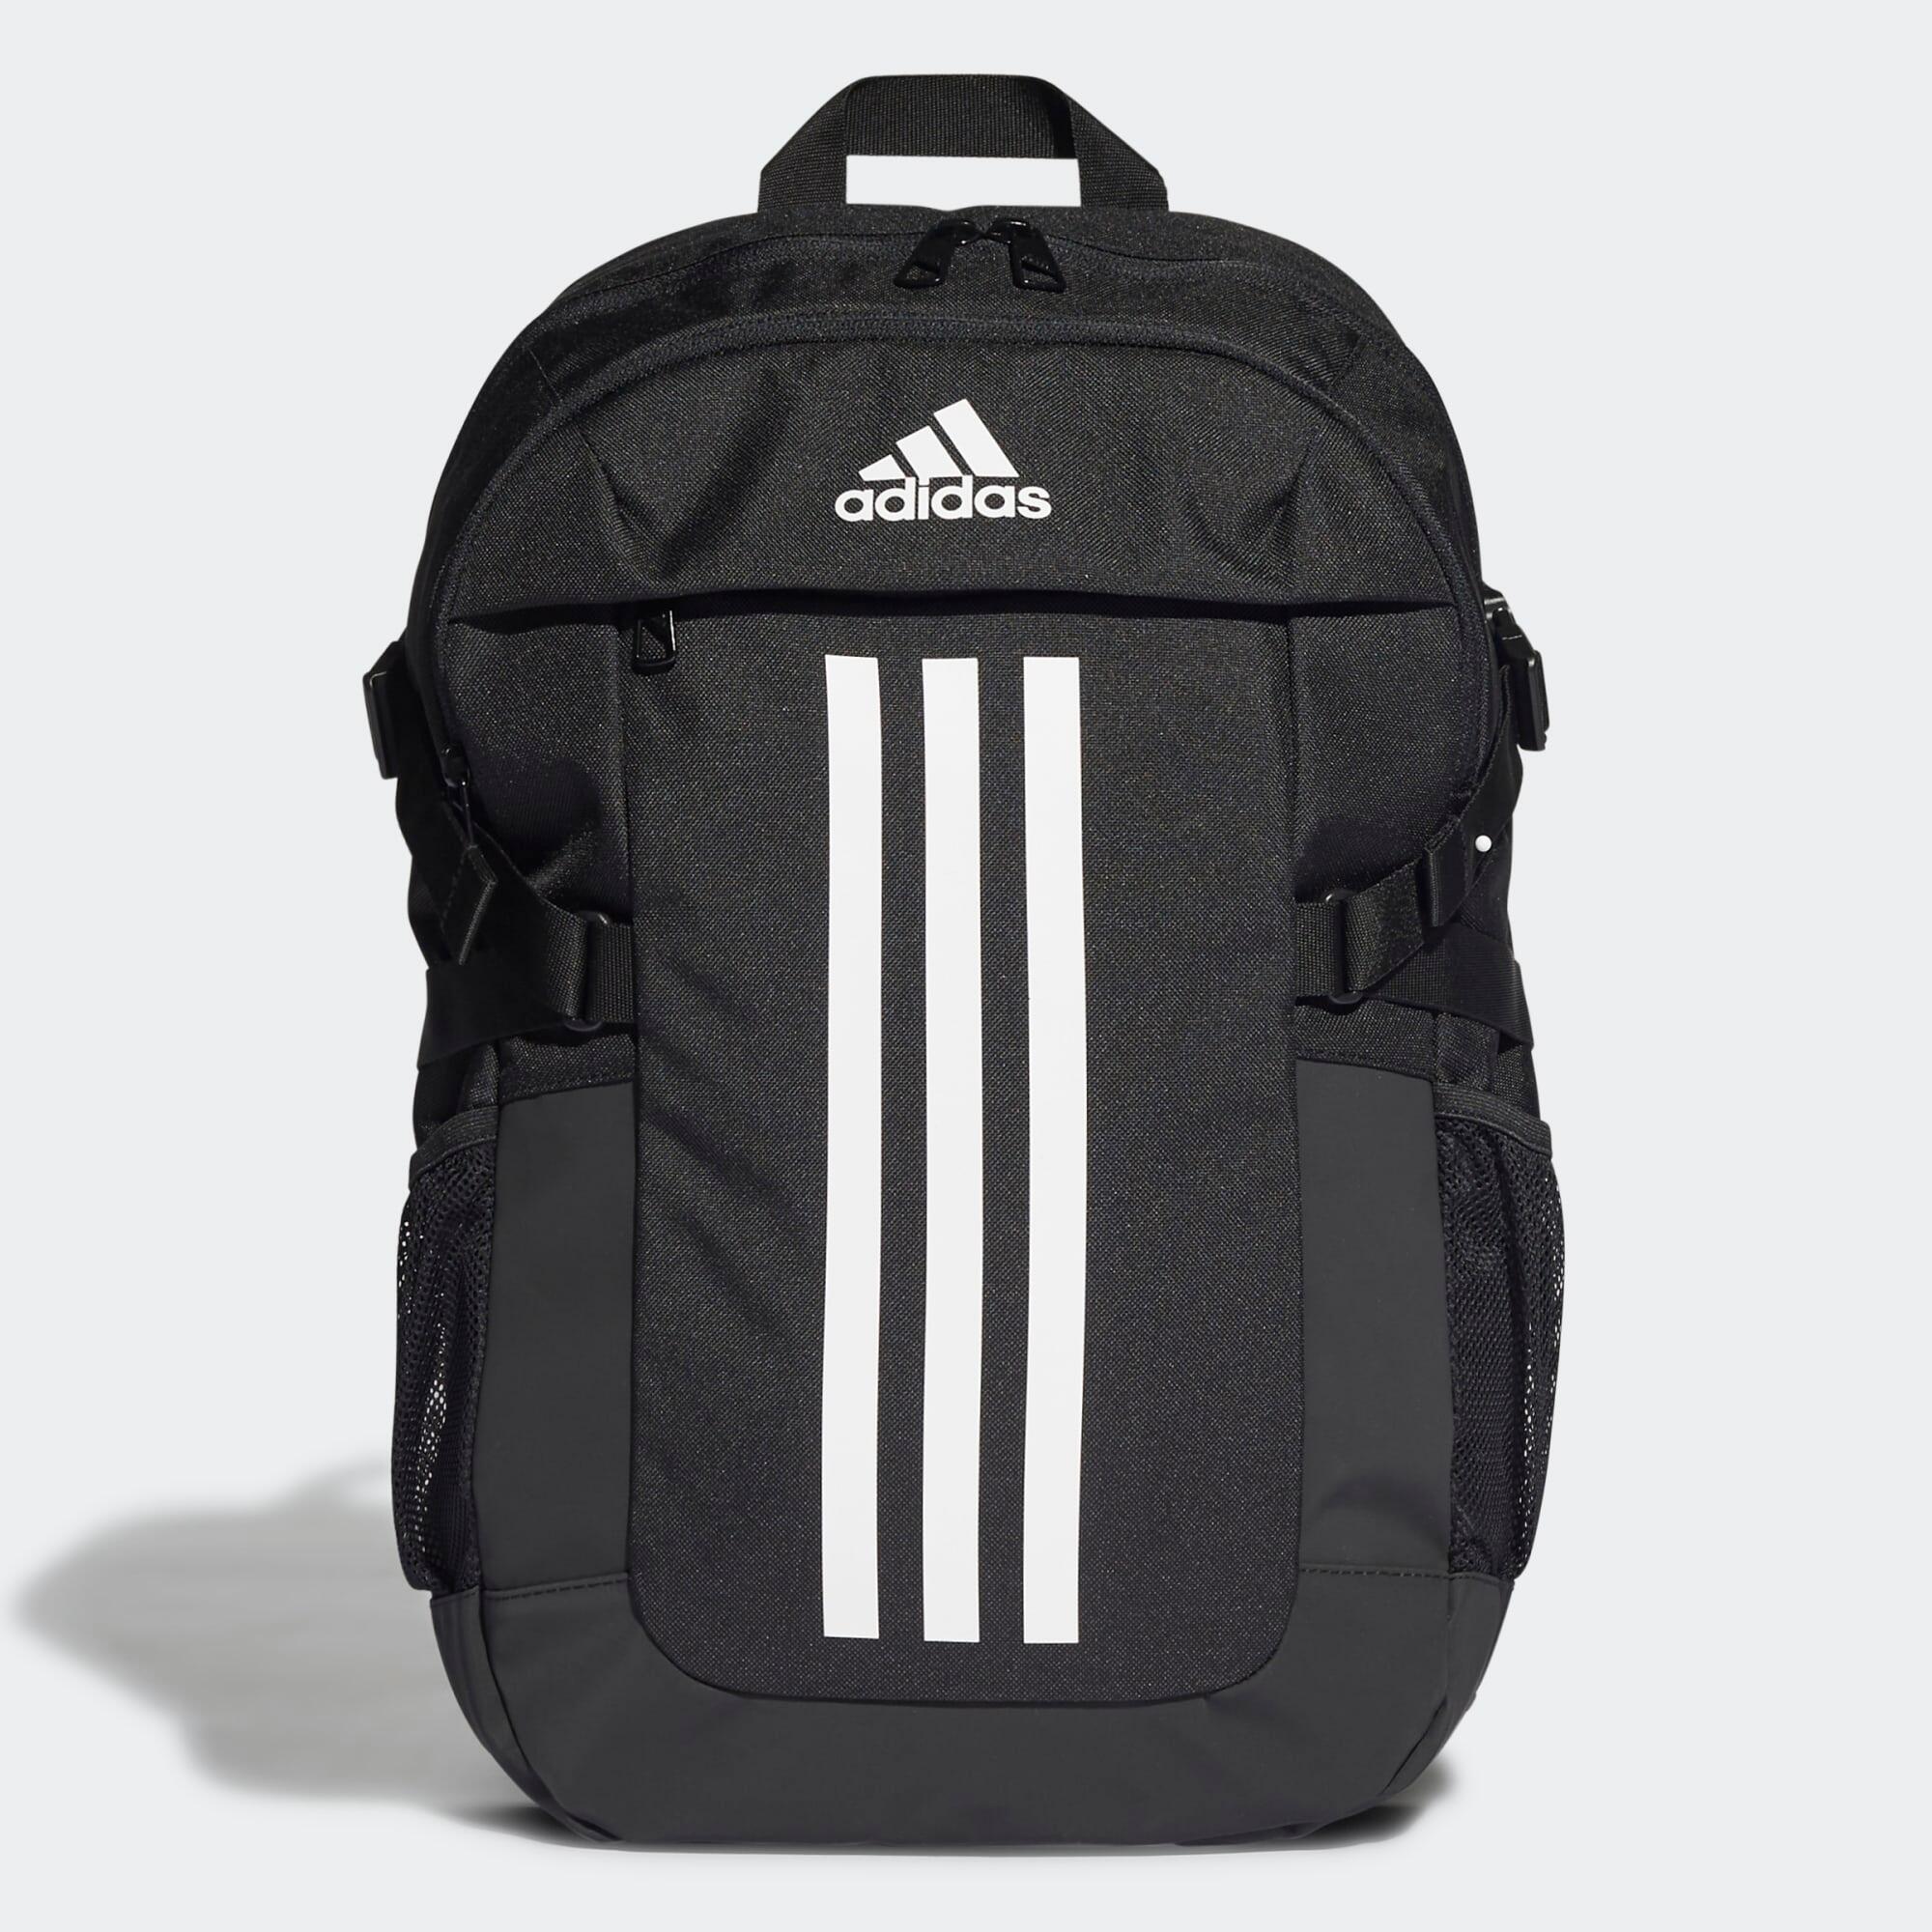 ADIDAS Power Backpack